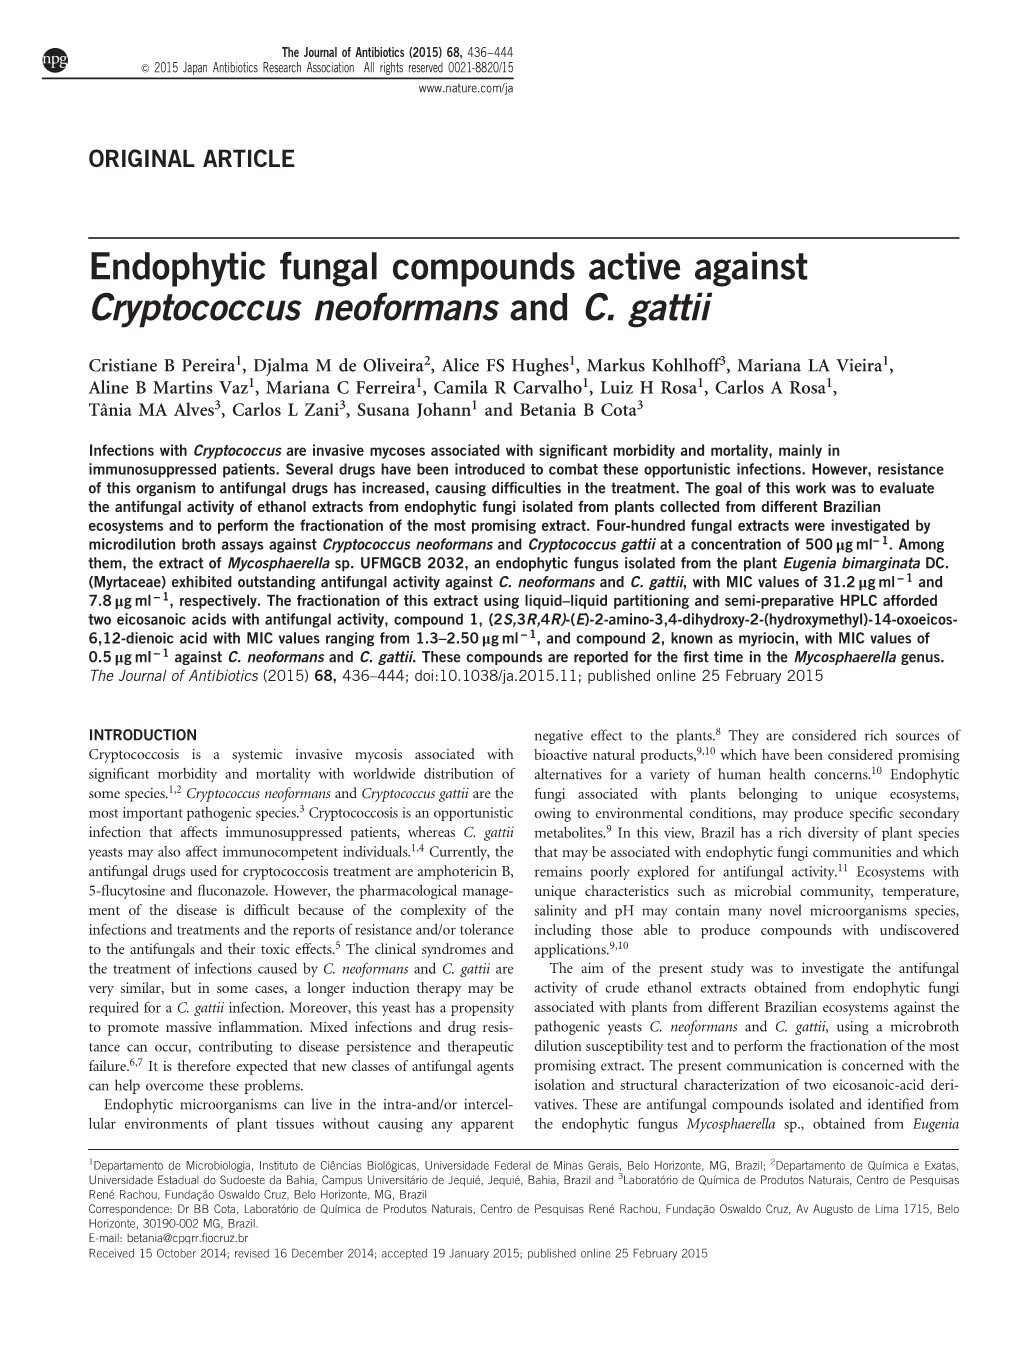 Endophytic Fungal Compounds Active Against Cryptococcus Neoformans and C